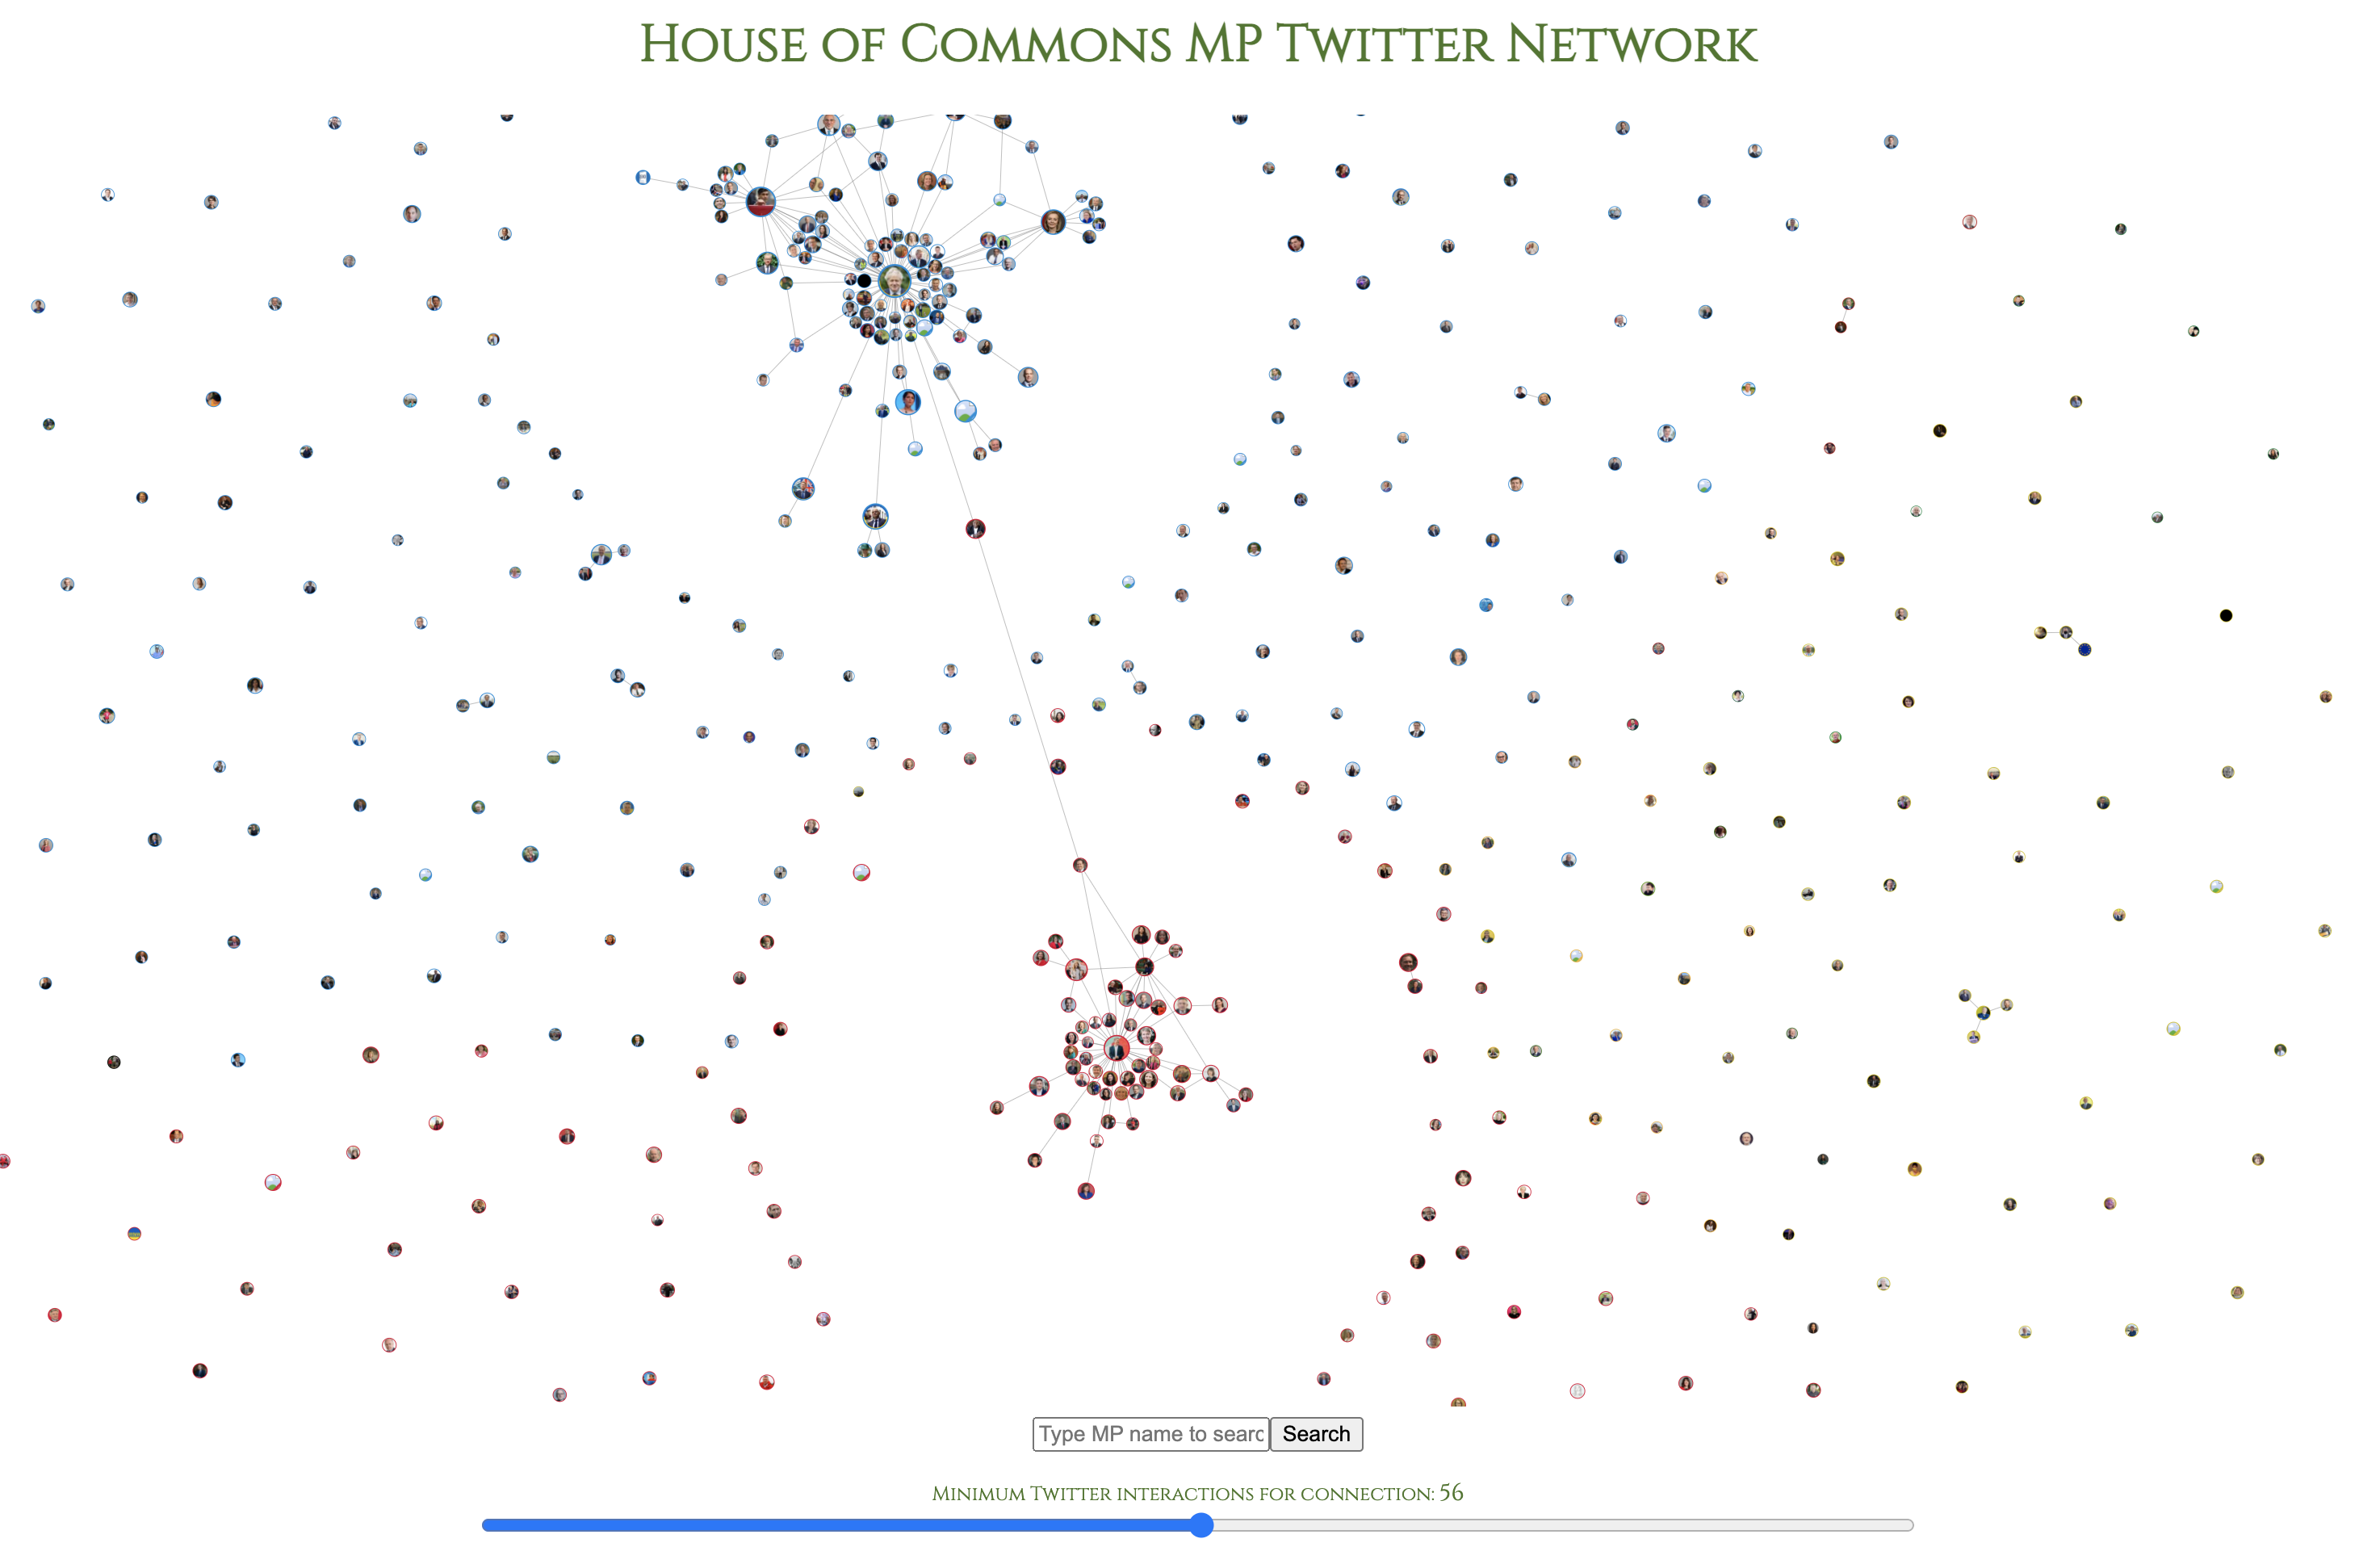 MP Twitter network in D3 with connection threshold raised to 56 Twitter interactions